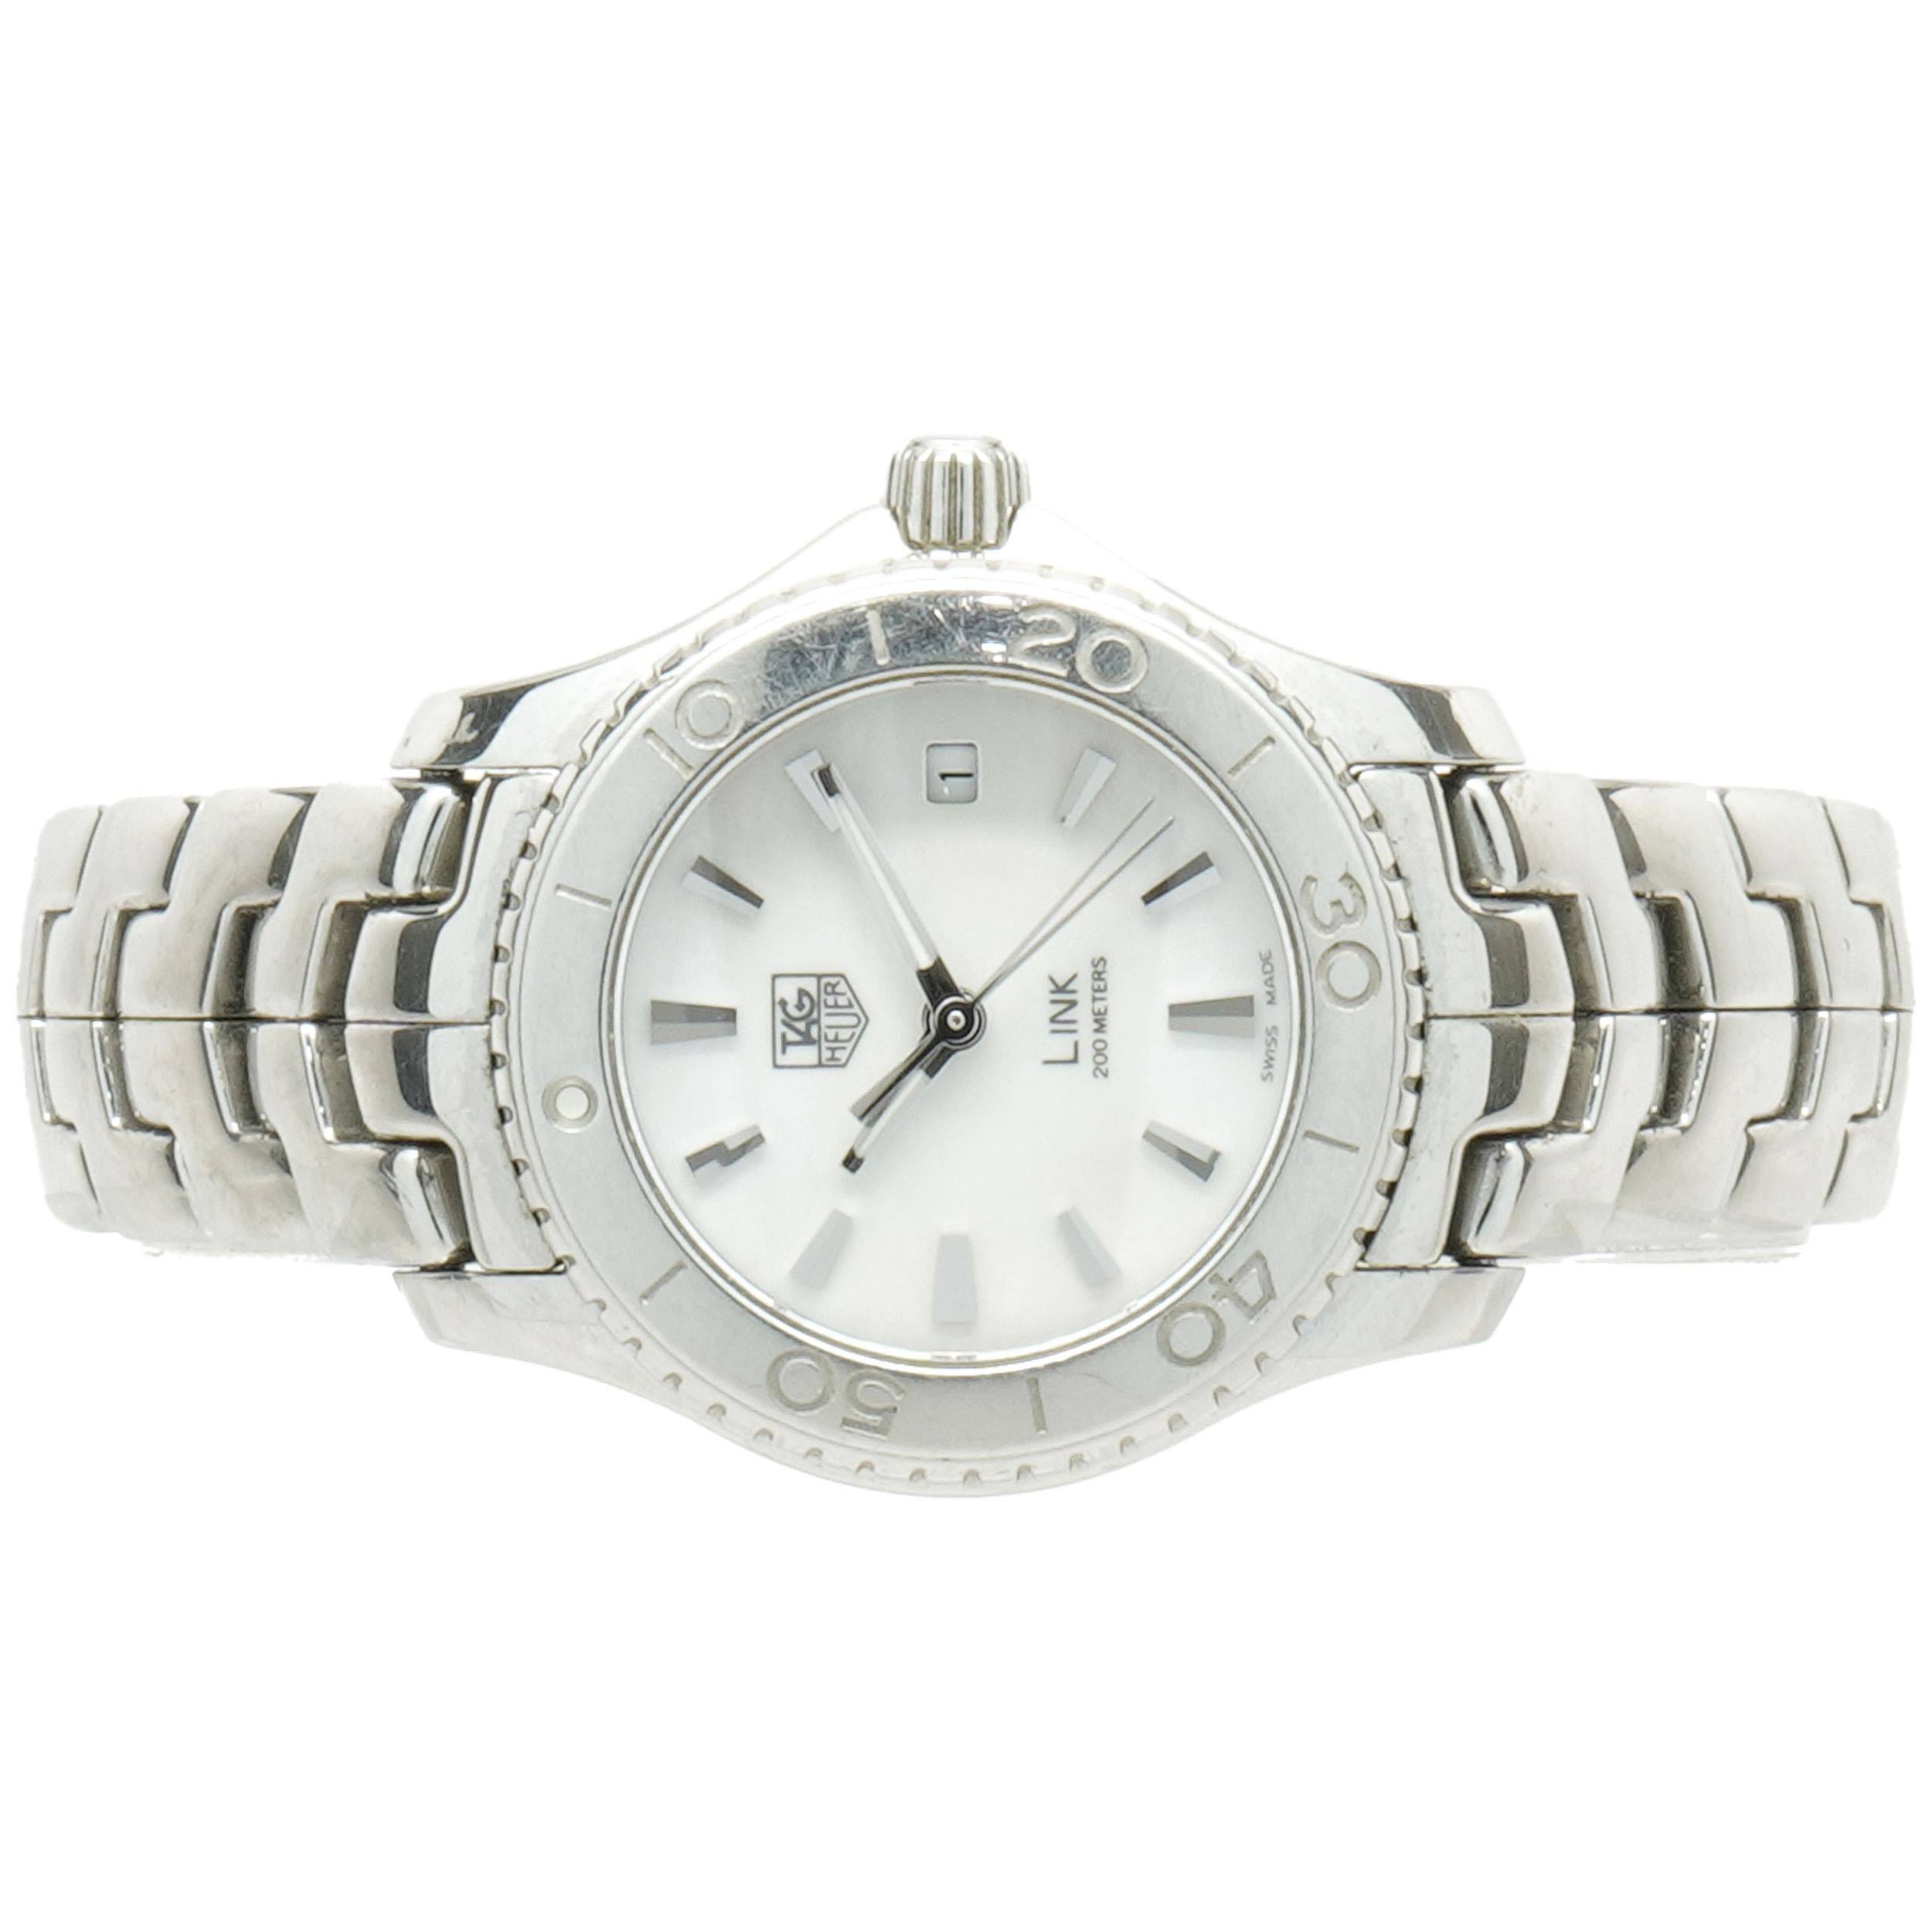 Movement: quartz
Function: hours, minutes, seconds, date
Case: 27mm round stainless steel case, timing bezel
Dial: mother of pearl, stick
Band: stainless steel, integrated clasp
Reference#: WJ1313-0
Serial #: CJ6XXX

No box or papers